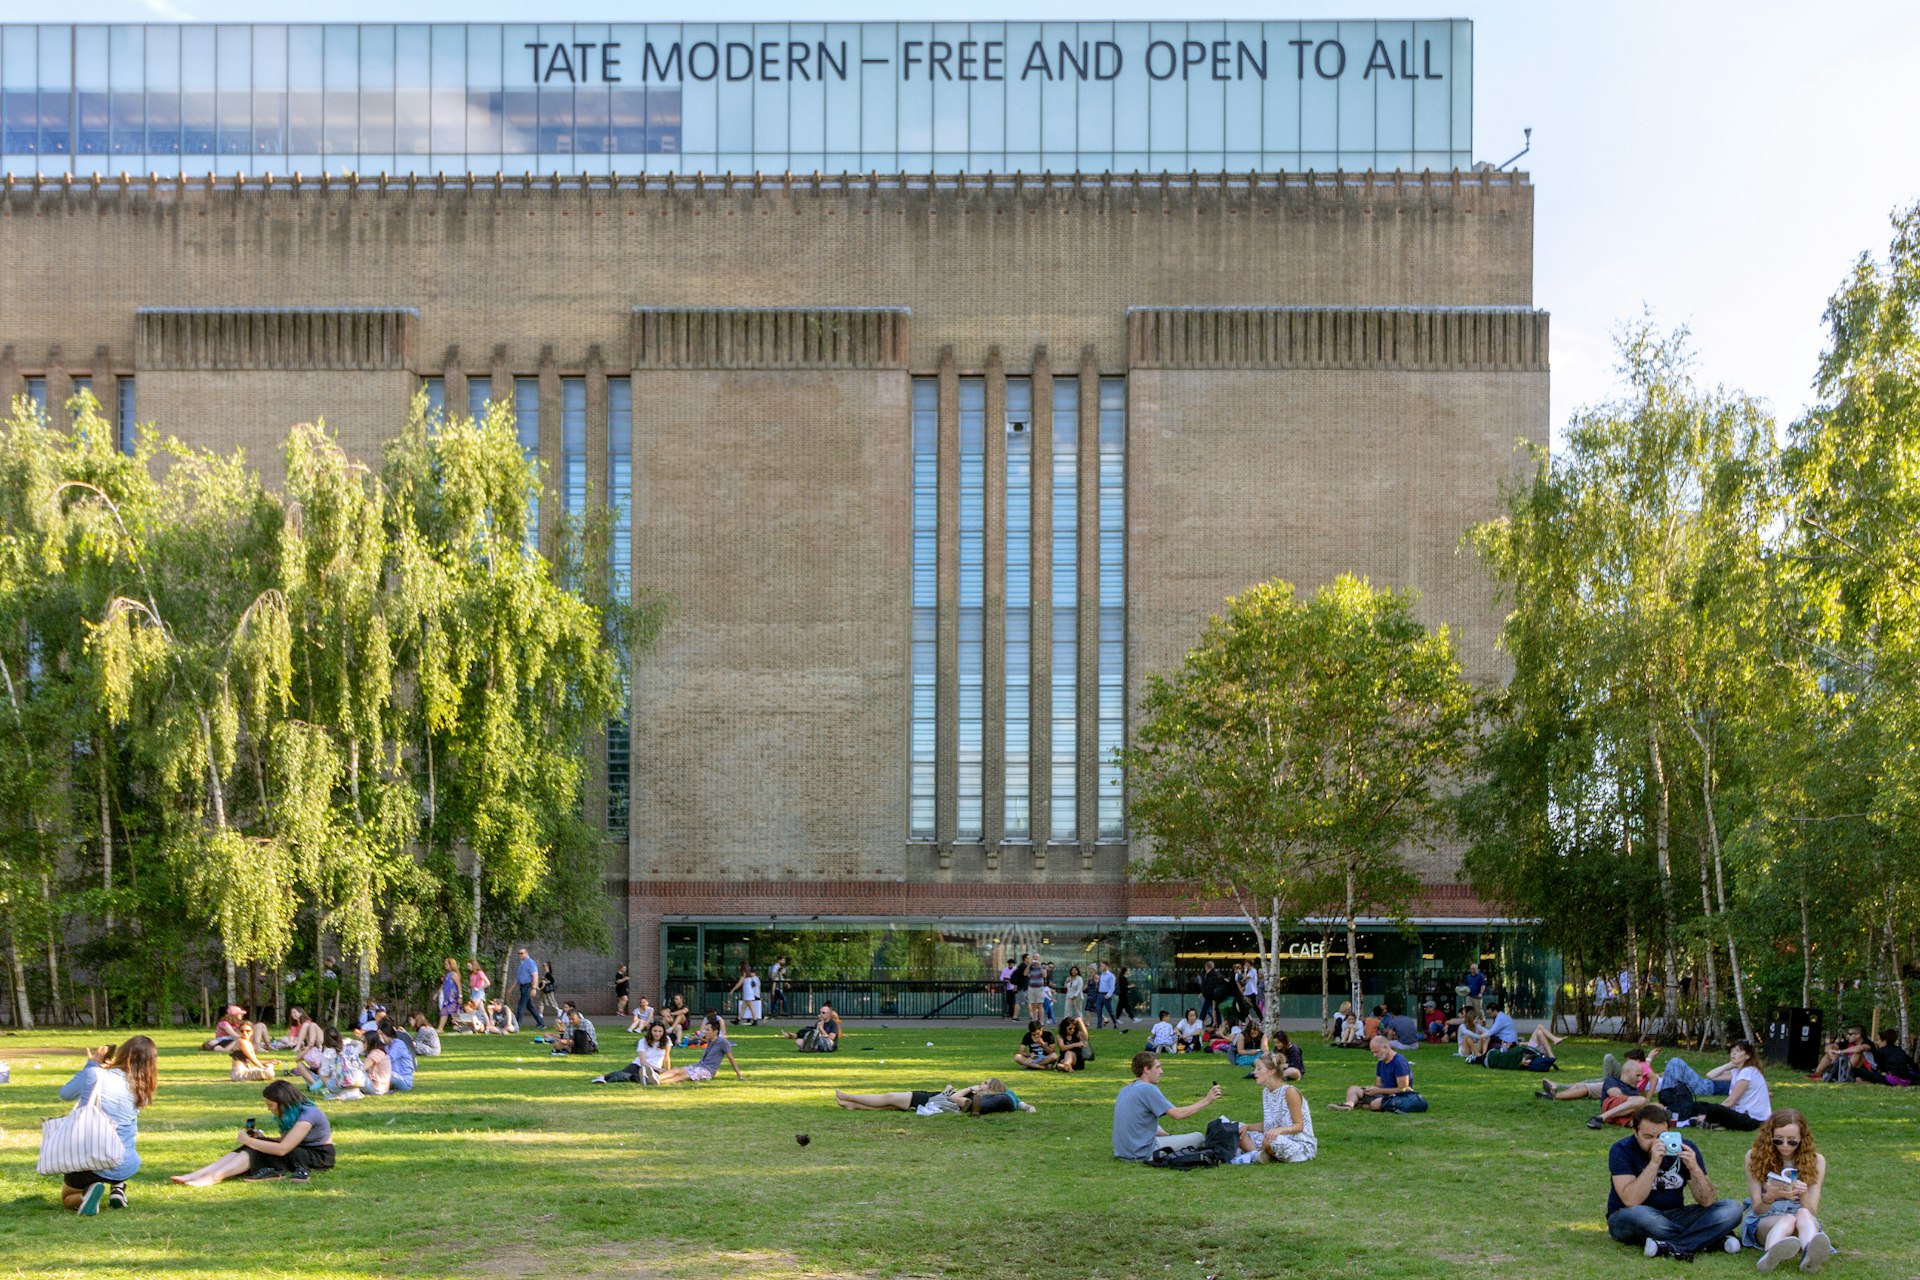 People seated on the grass outside the Tate Modern art gallery. 